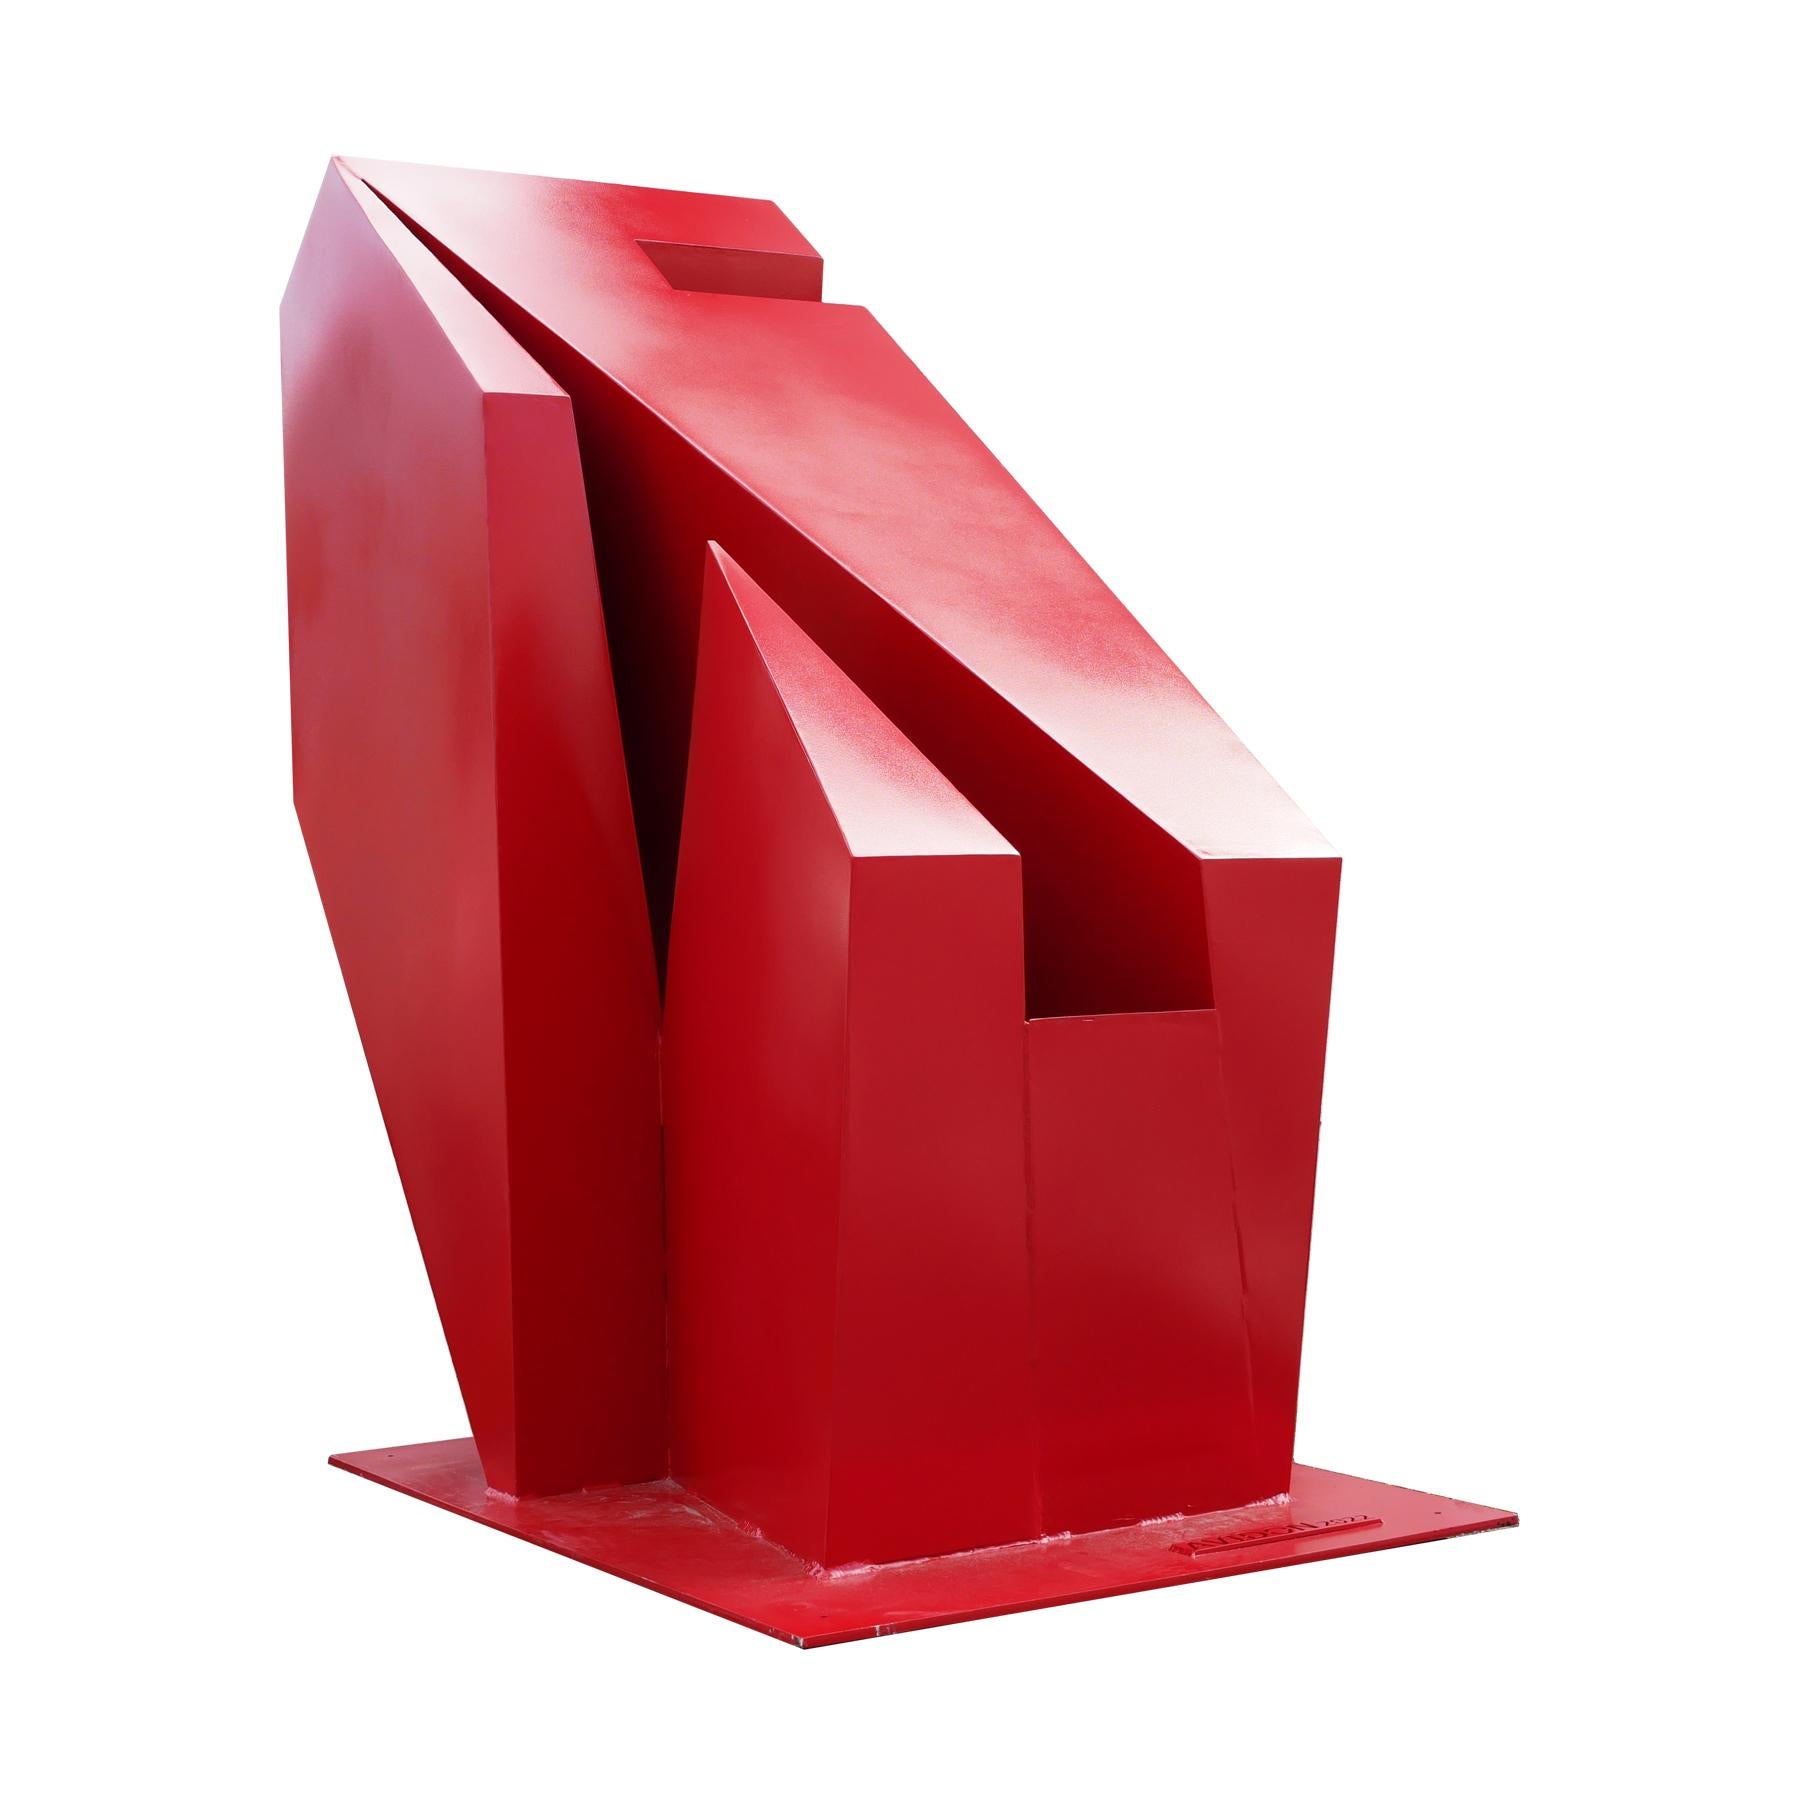 Reeves Art and Design Abstract Sculpture - Large Contemporary Geometric Red Outdoor Sculpture 